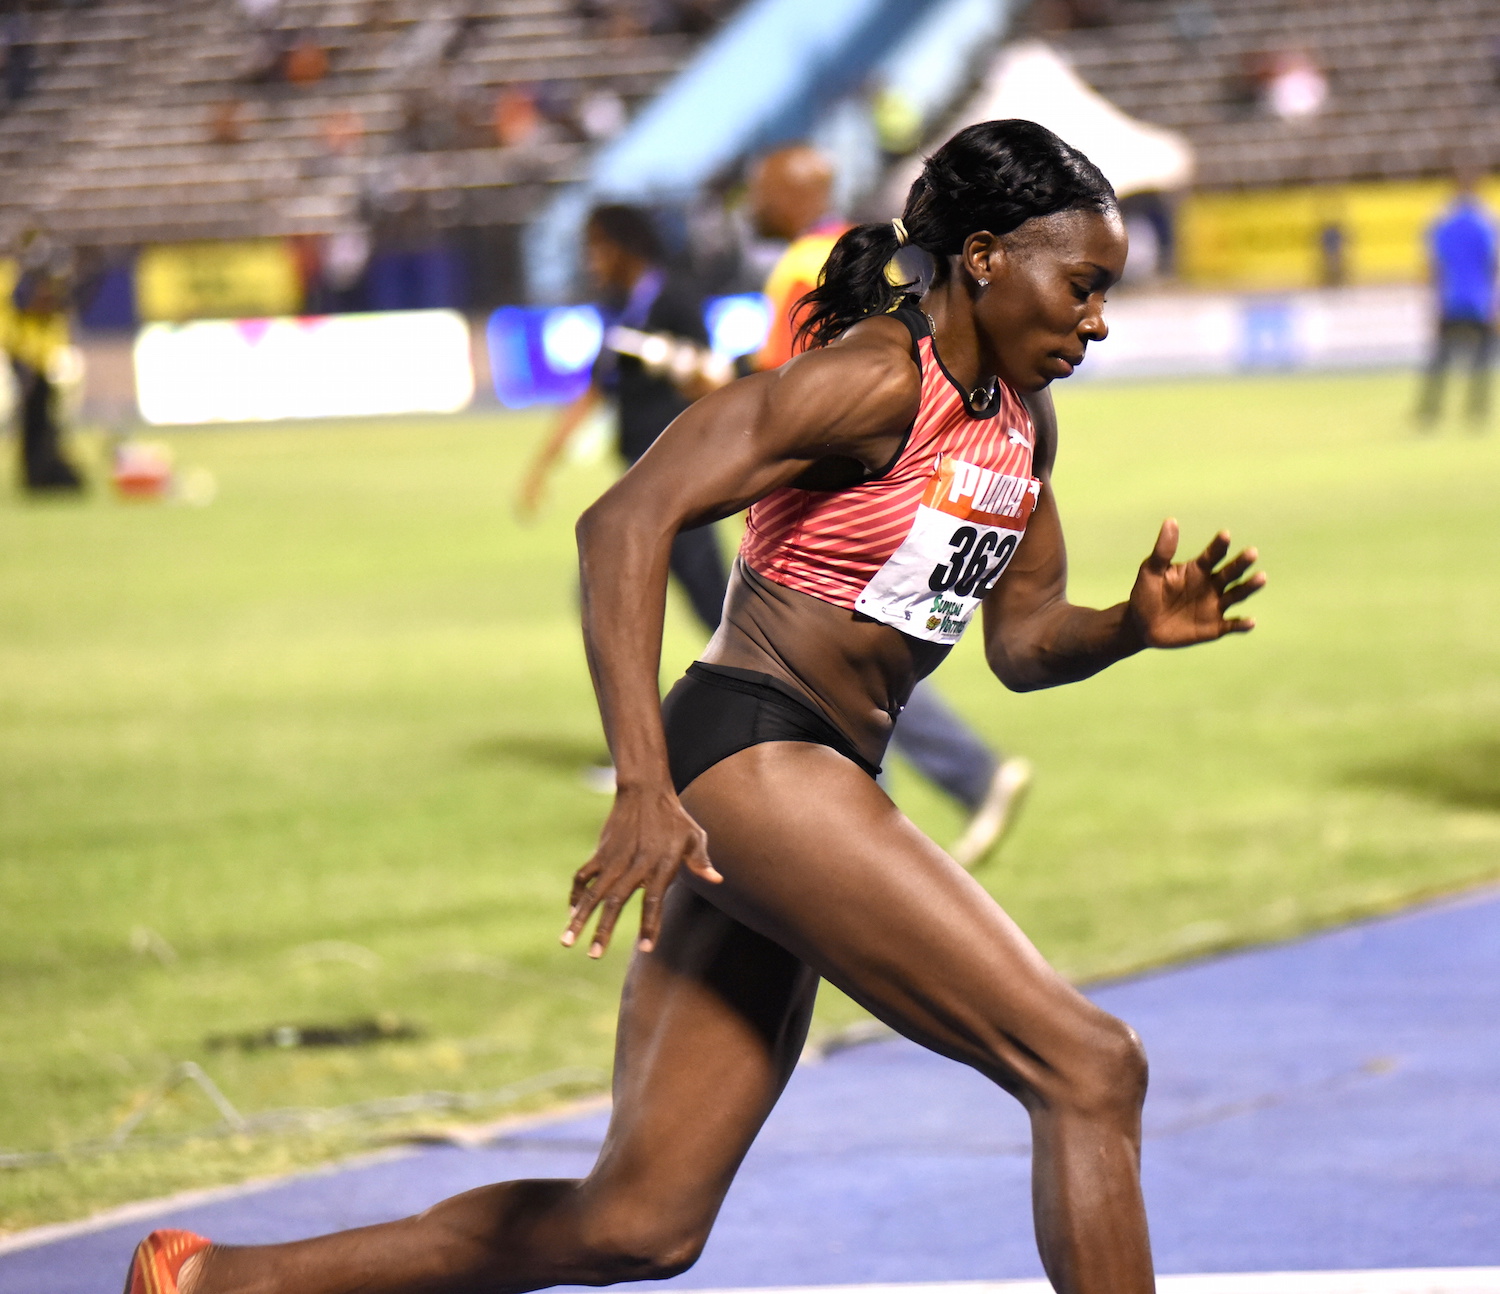 Battered, bruised by injuries, Kenia at 36 ready for Rio 2016